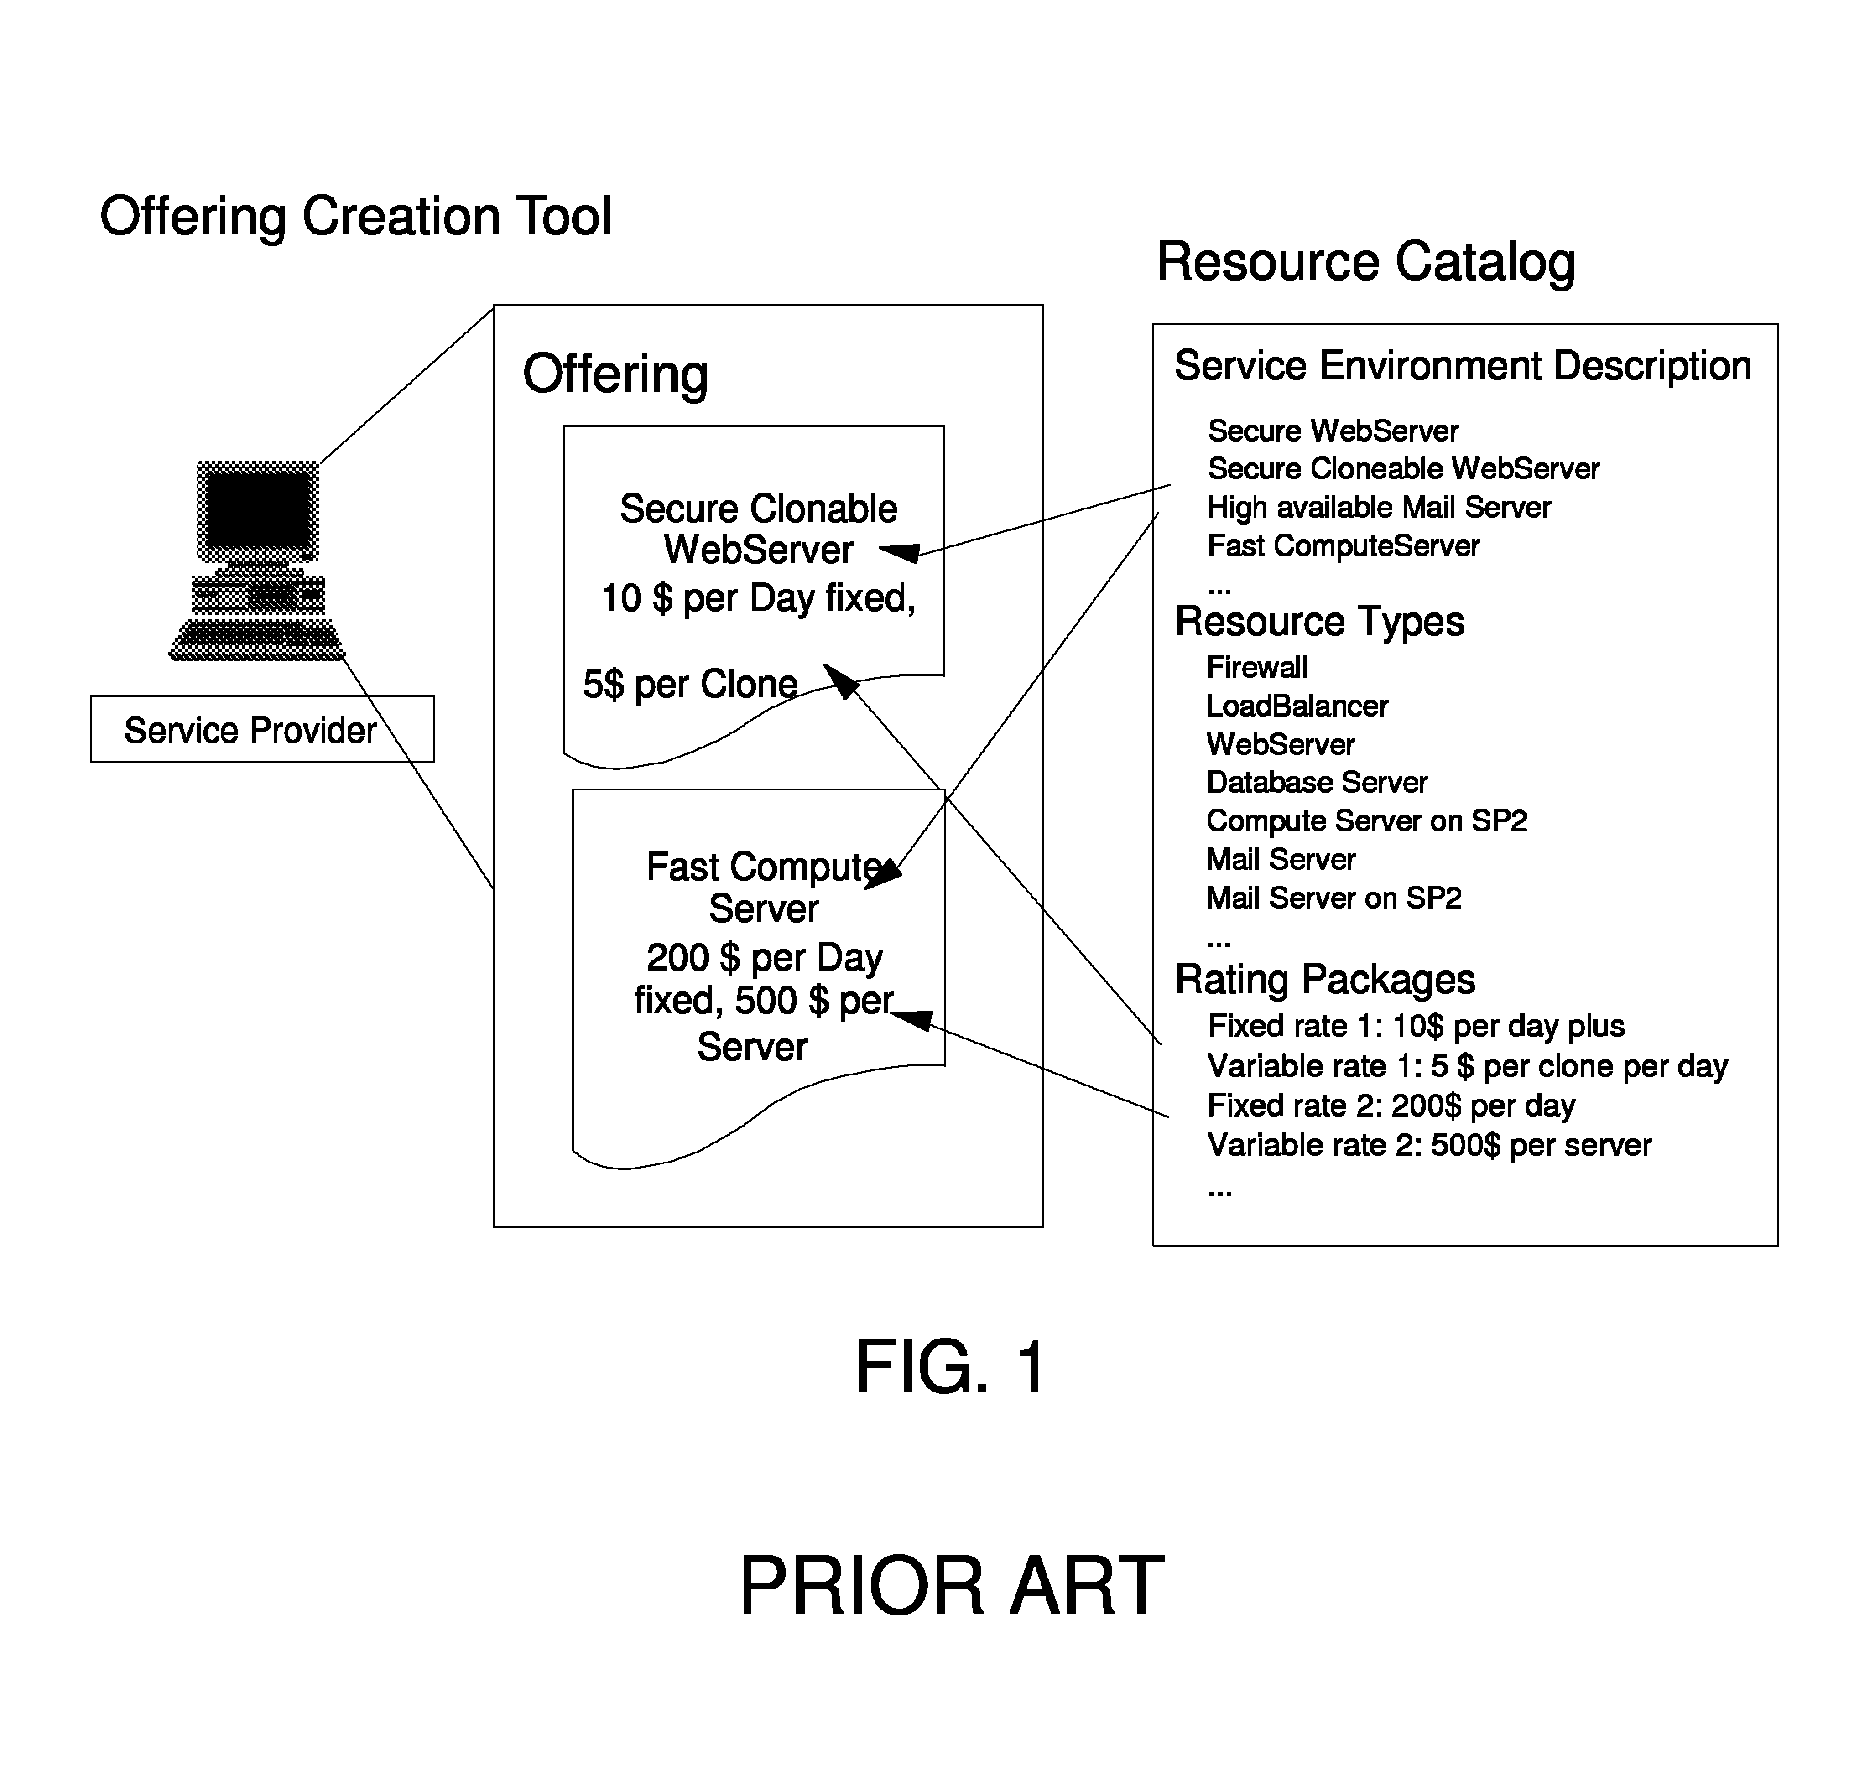 Method for dynamically and automatically setting up offerings for IT services